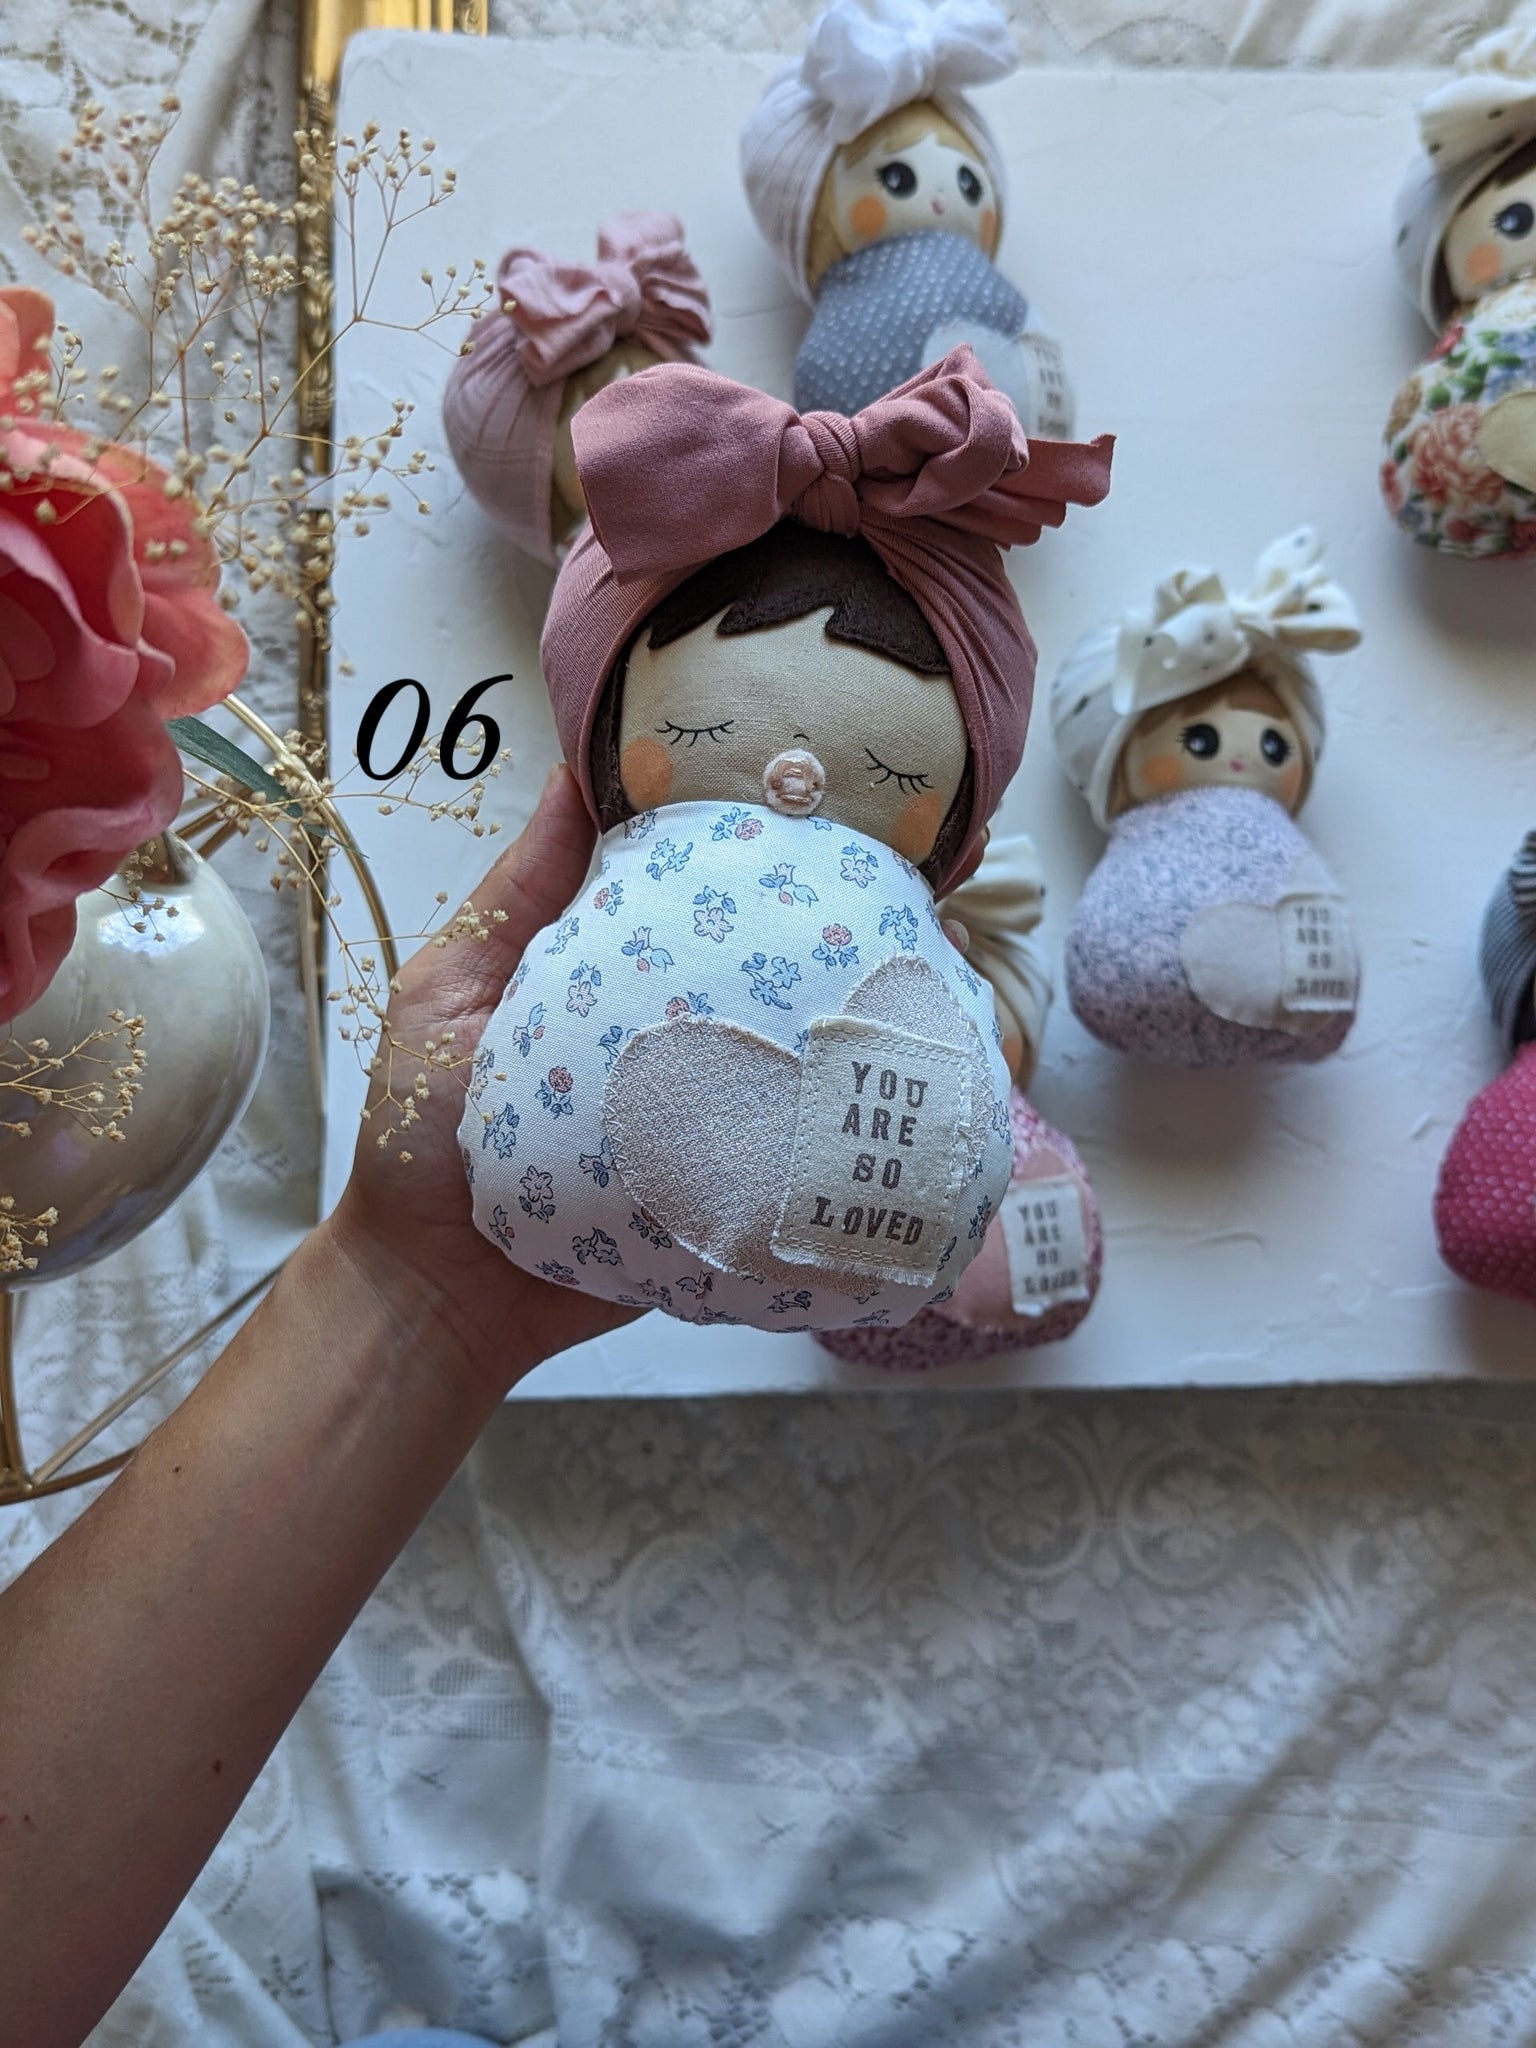 06 Swaddle baby, handmade doll, you are so loved collection